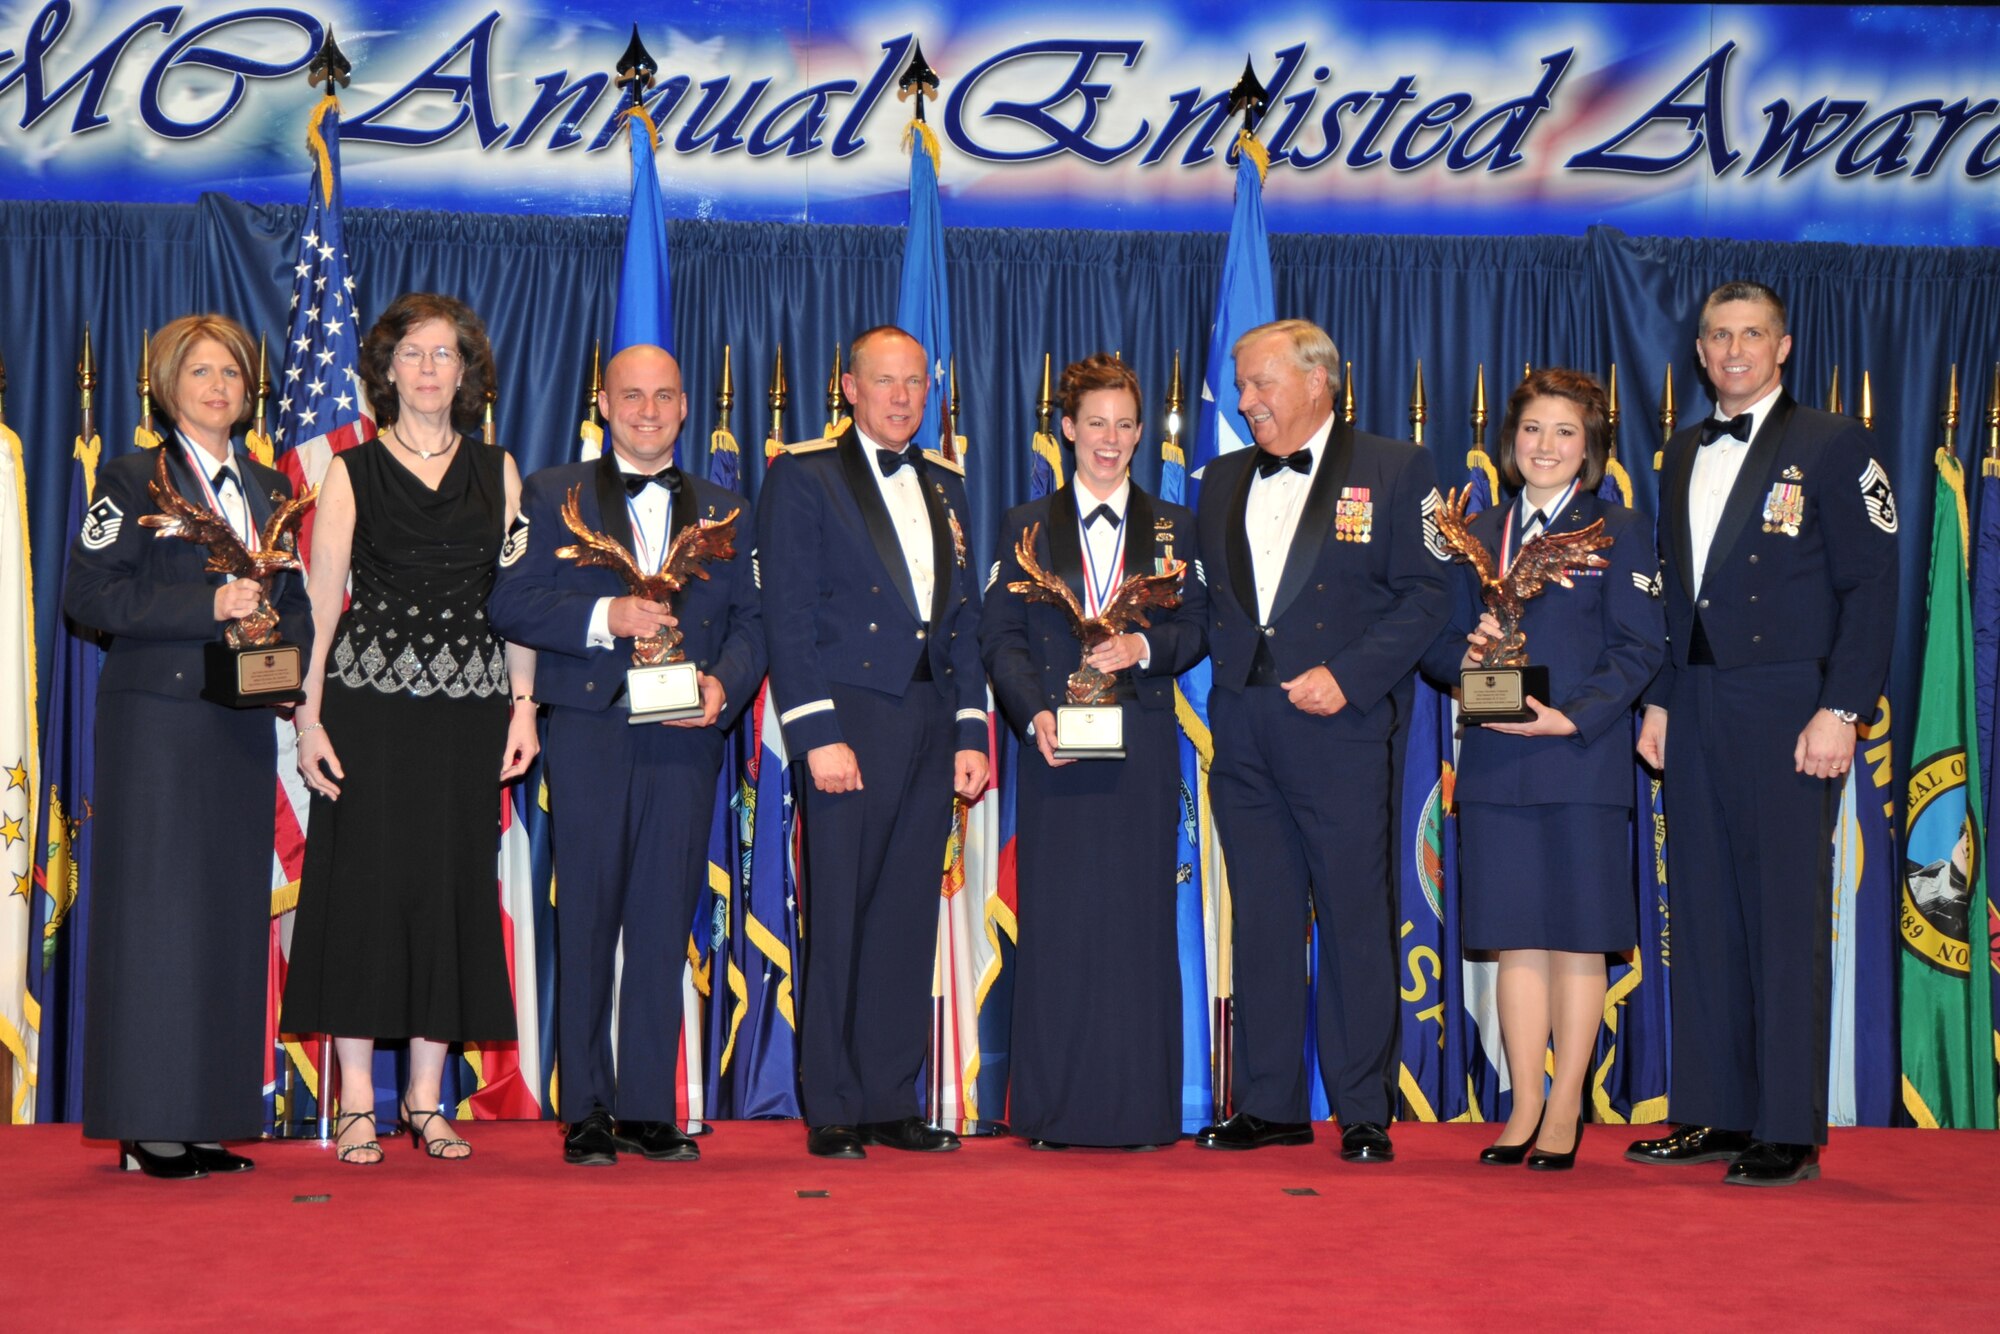 Air Force Materiel Command's Annual Enlisted Award winners for 2011 stand on stage at the ceremony. From left: Master Sgt. Kavina M. Agnew, Tinker Air Force Base, Okla.; Shiela Wallace, Air Force Association Wright Memorial Chapter 212 president; Master Sgt. Alan M. Braden, Wright-Patterson Air Force Base, Ohio; Gen. Donald Hoffman, AFMC commander; Staff Sgt. Linn A. Knight, Eglin Air Force Base, Fla.; retired Chief Master Sgt. of the Air Force James C. Binnicker; Airman First Class Andrea R.P. Ally, Wright-Patterson Air Force Base, Ohio; and Chief Master Sgt. Eric R. Jaren, AFMC command chief. (U.S. Air Force photo/Ben Strasser)